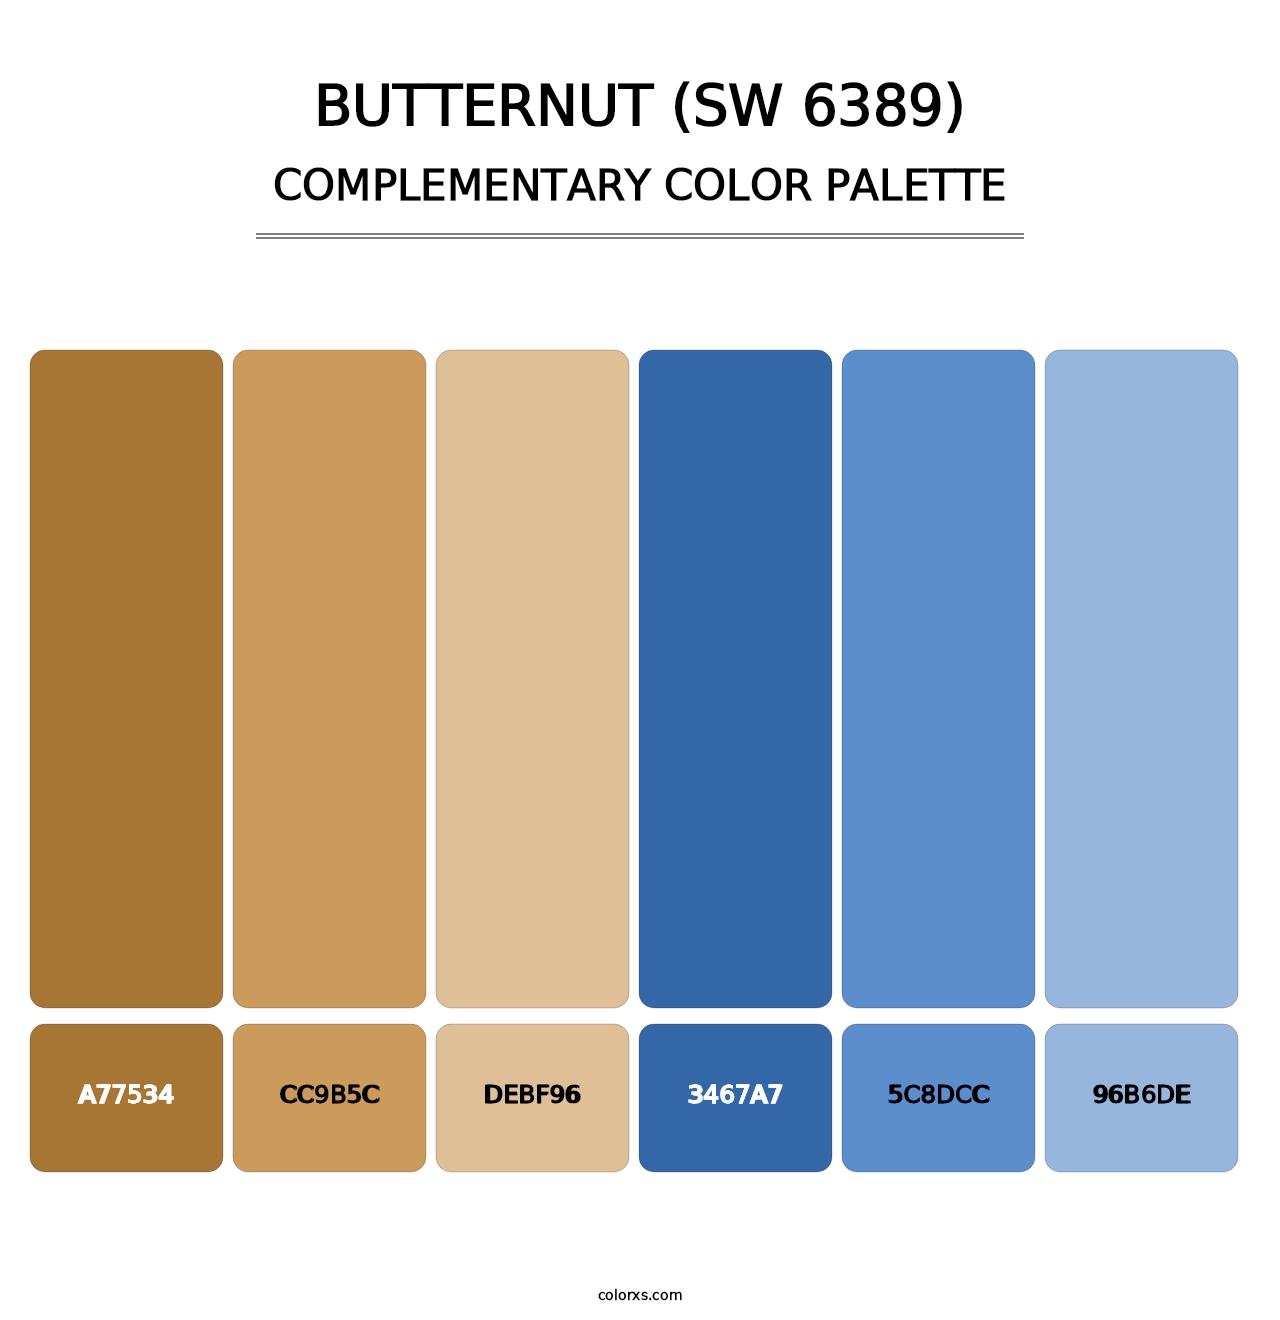 Butternut (SW 6389) - Complementary Color Palette